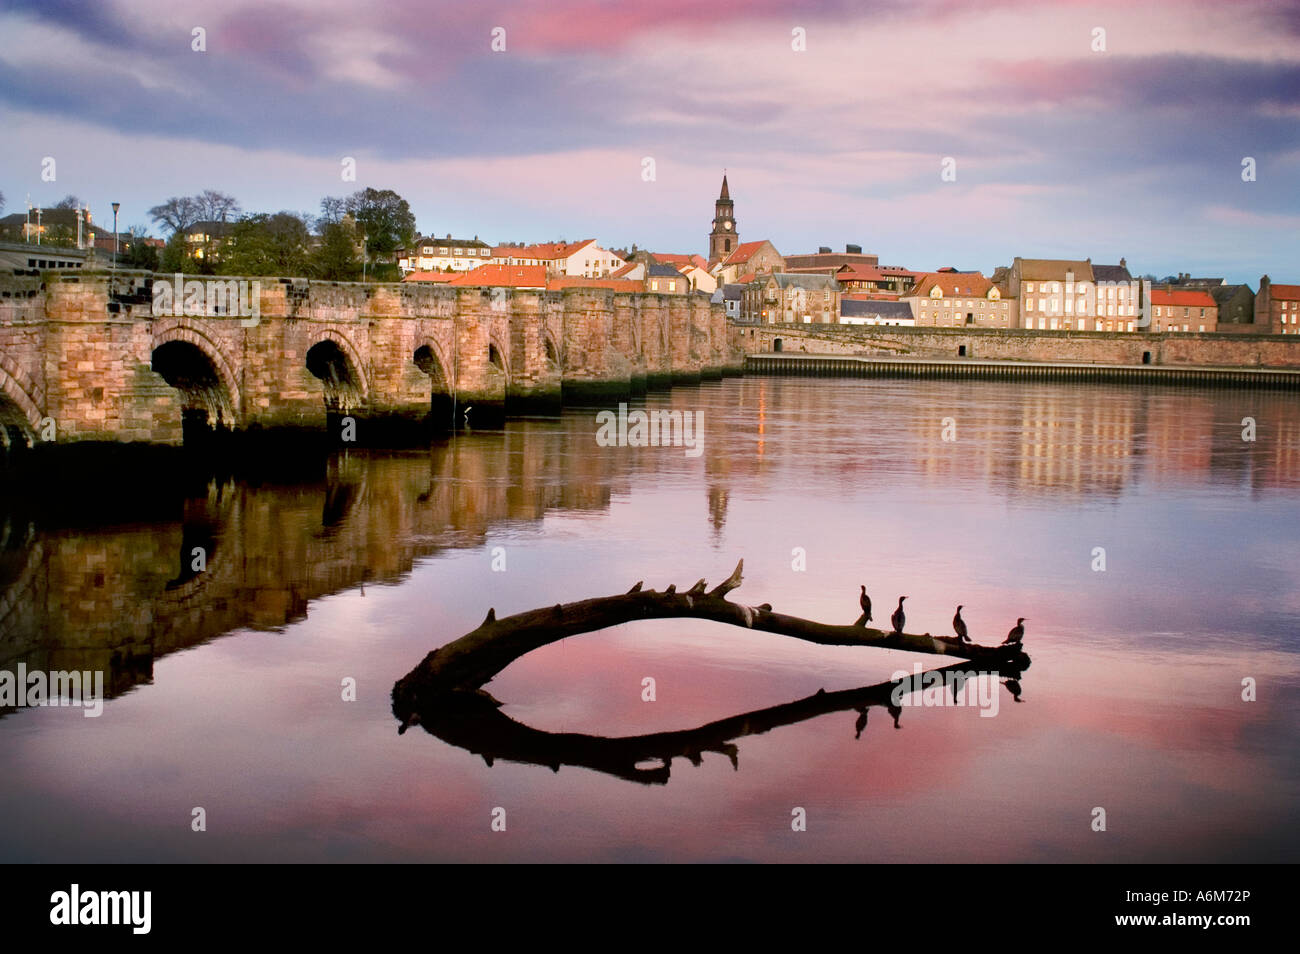 The Old Bridge and town of Berwick upon Tweed the most northerly town in England. Stock Photo